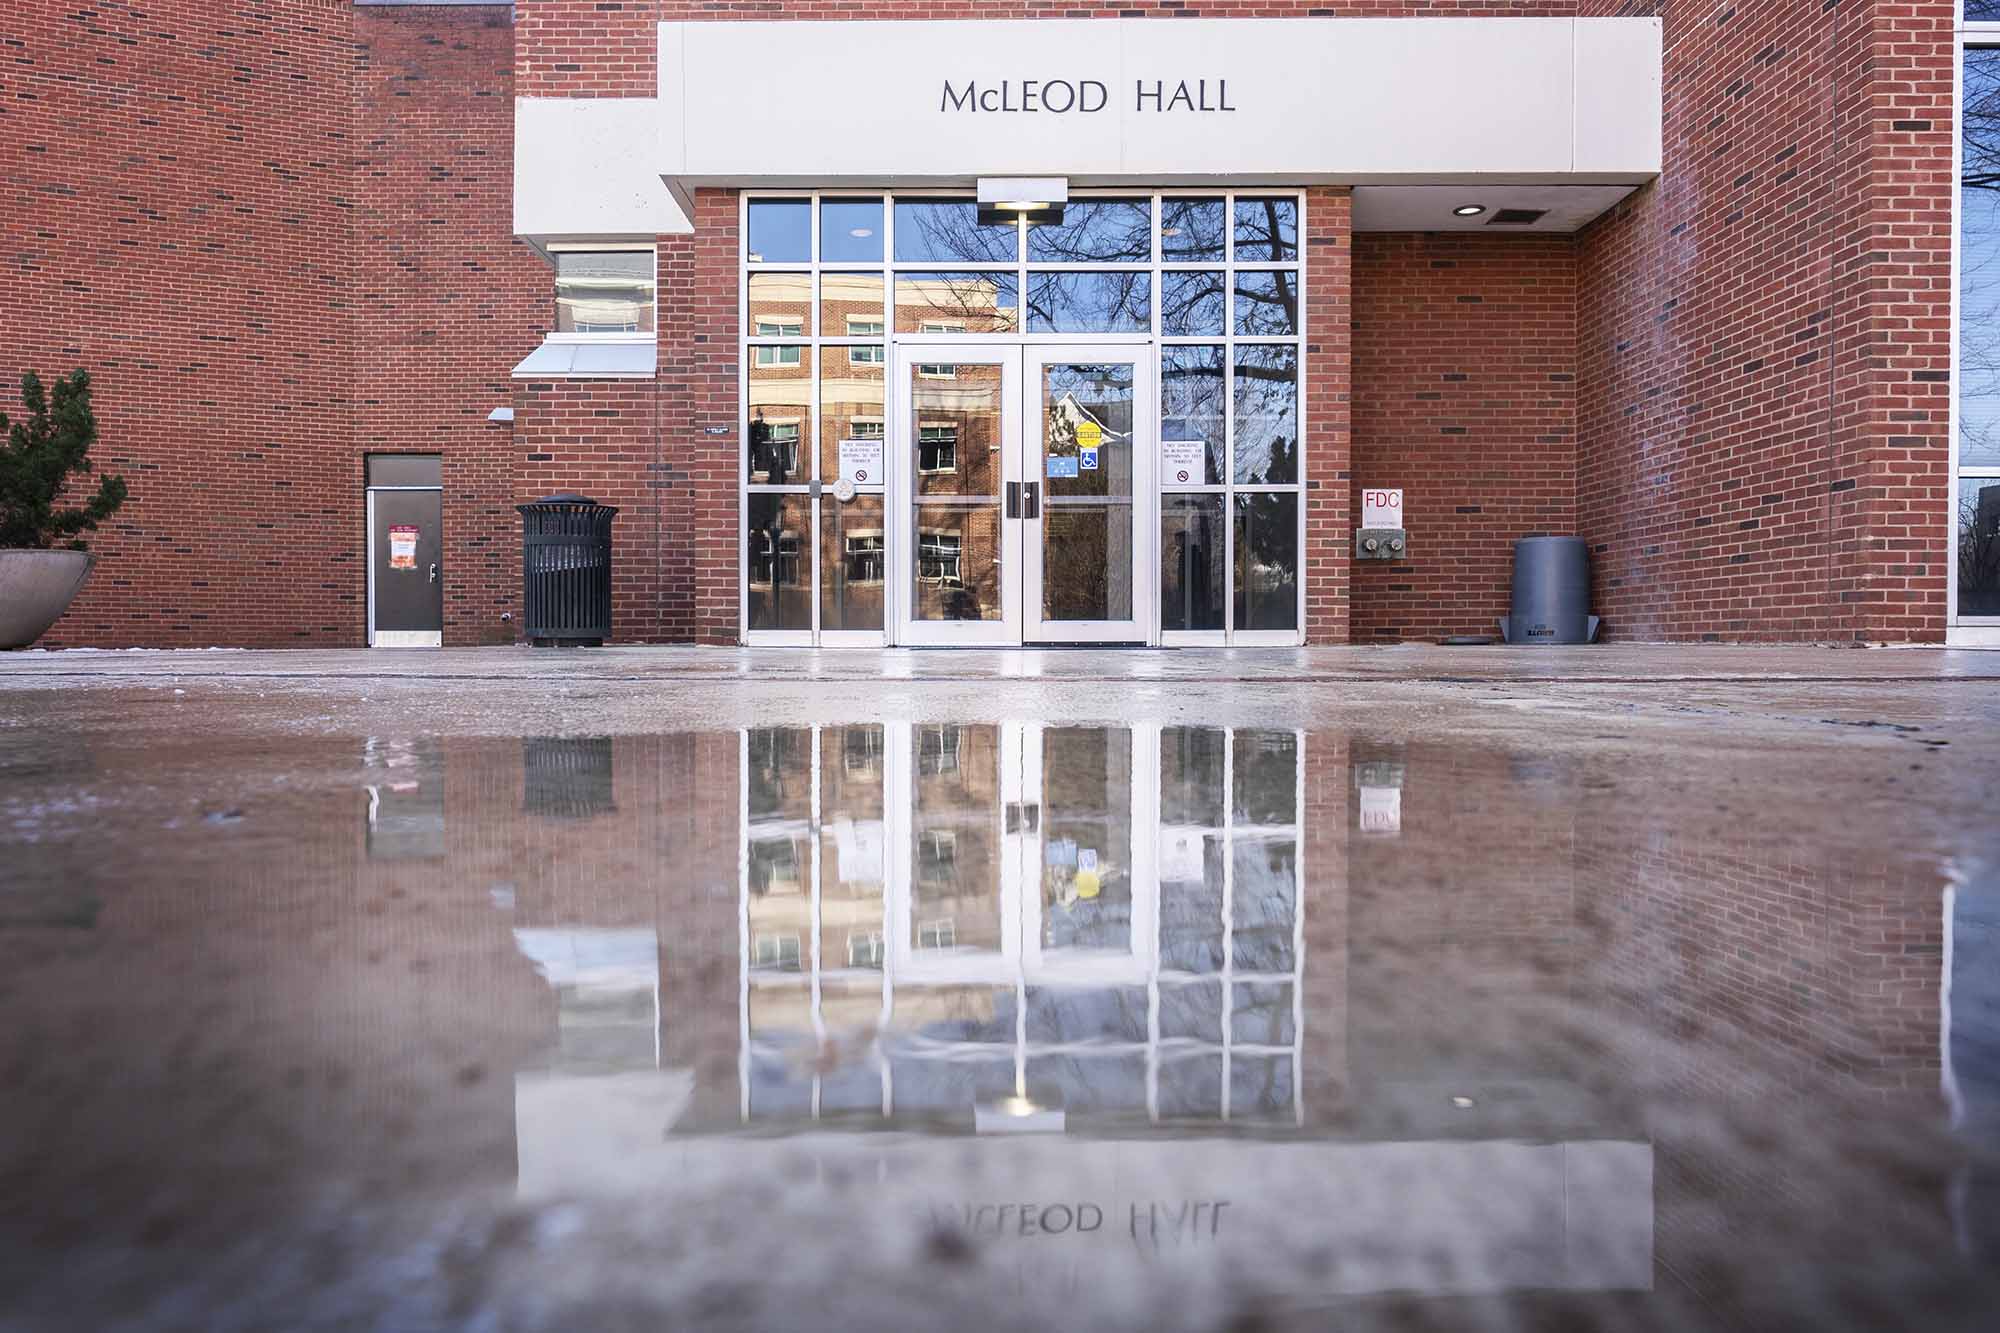 Entrance of the McLeod Hall